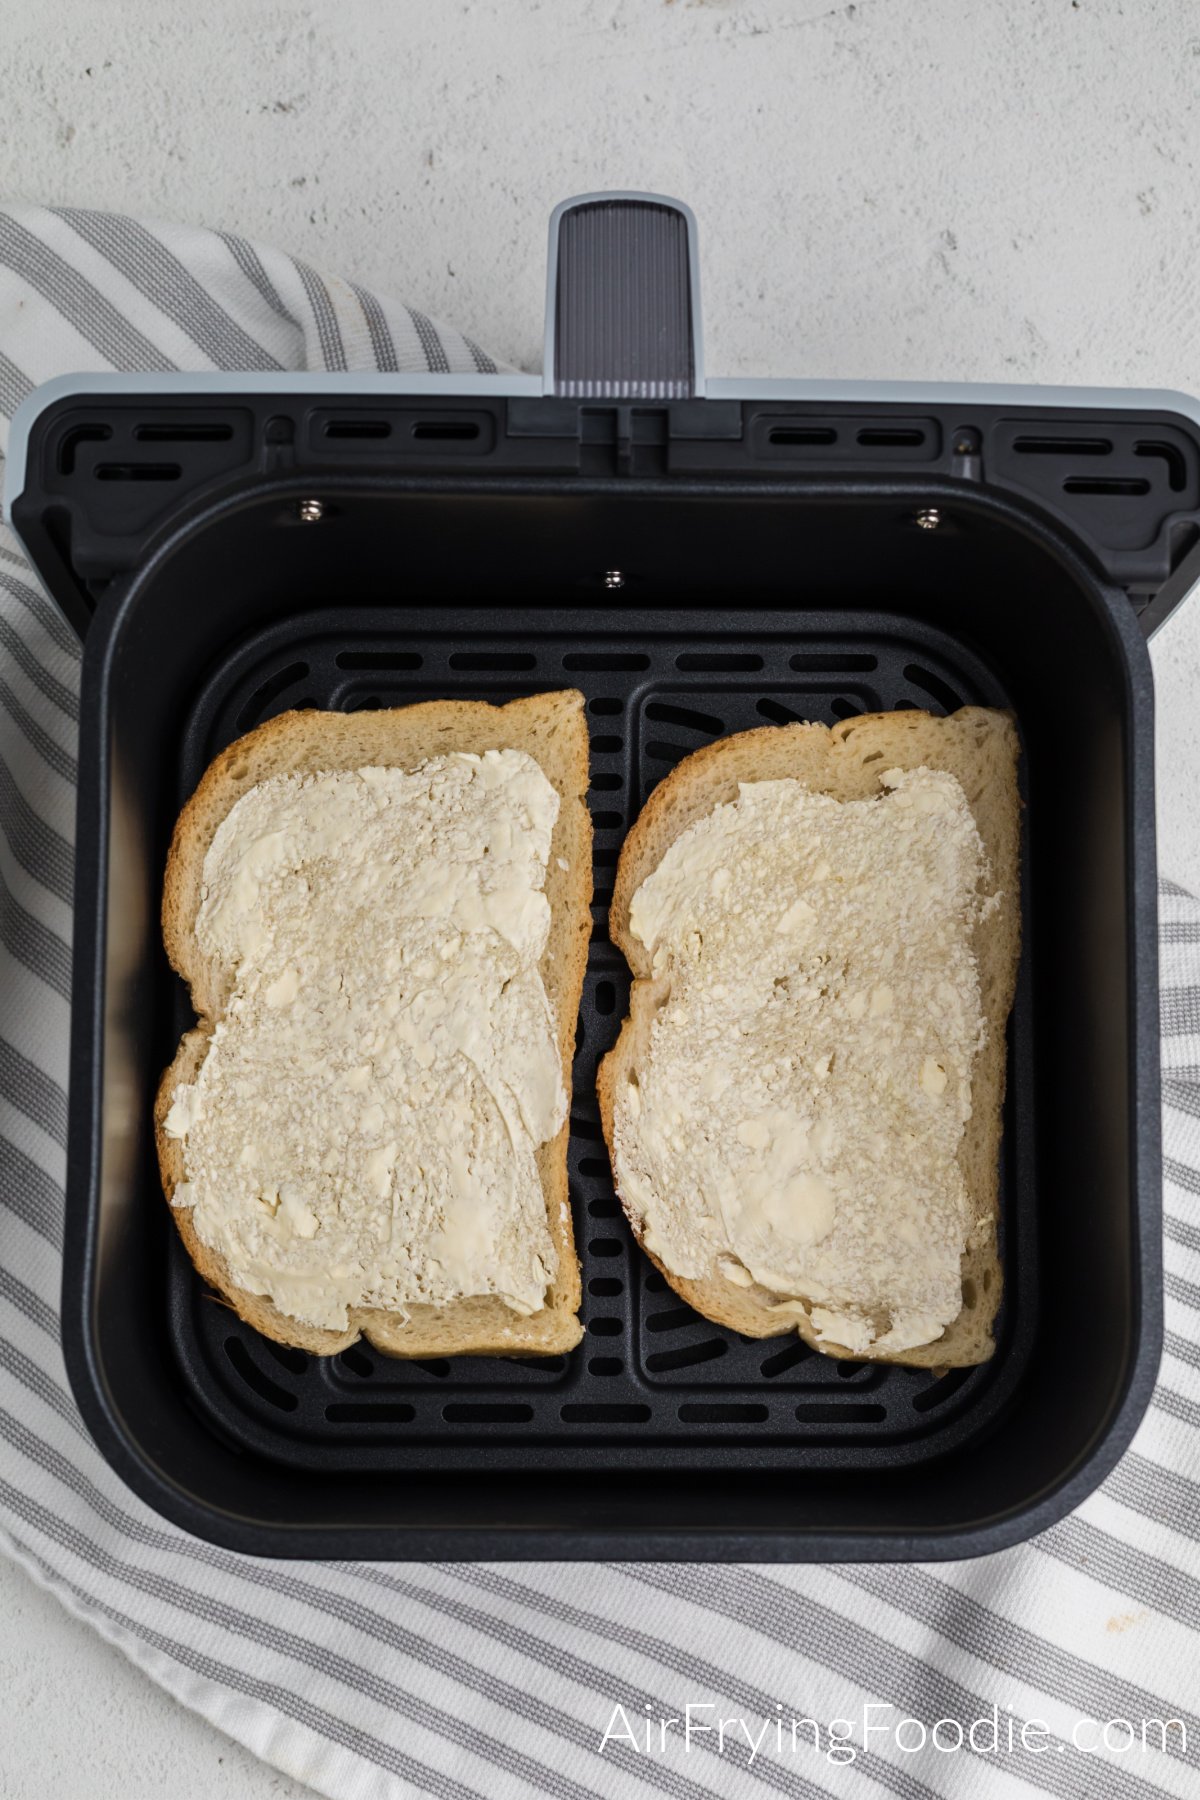 Buttered bread in the basket of the air fryer.